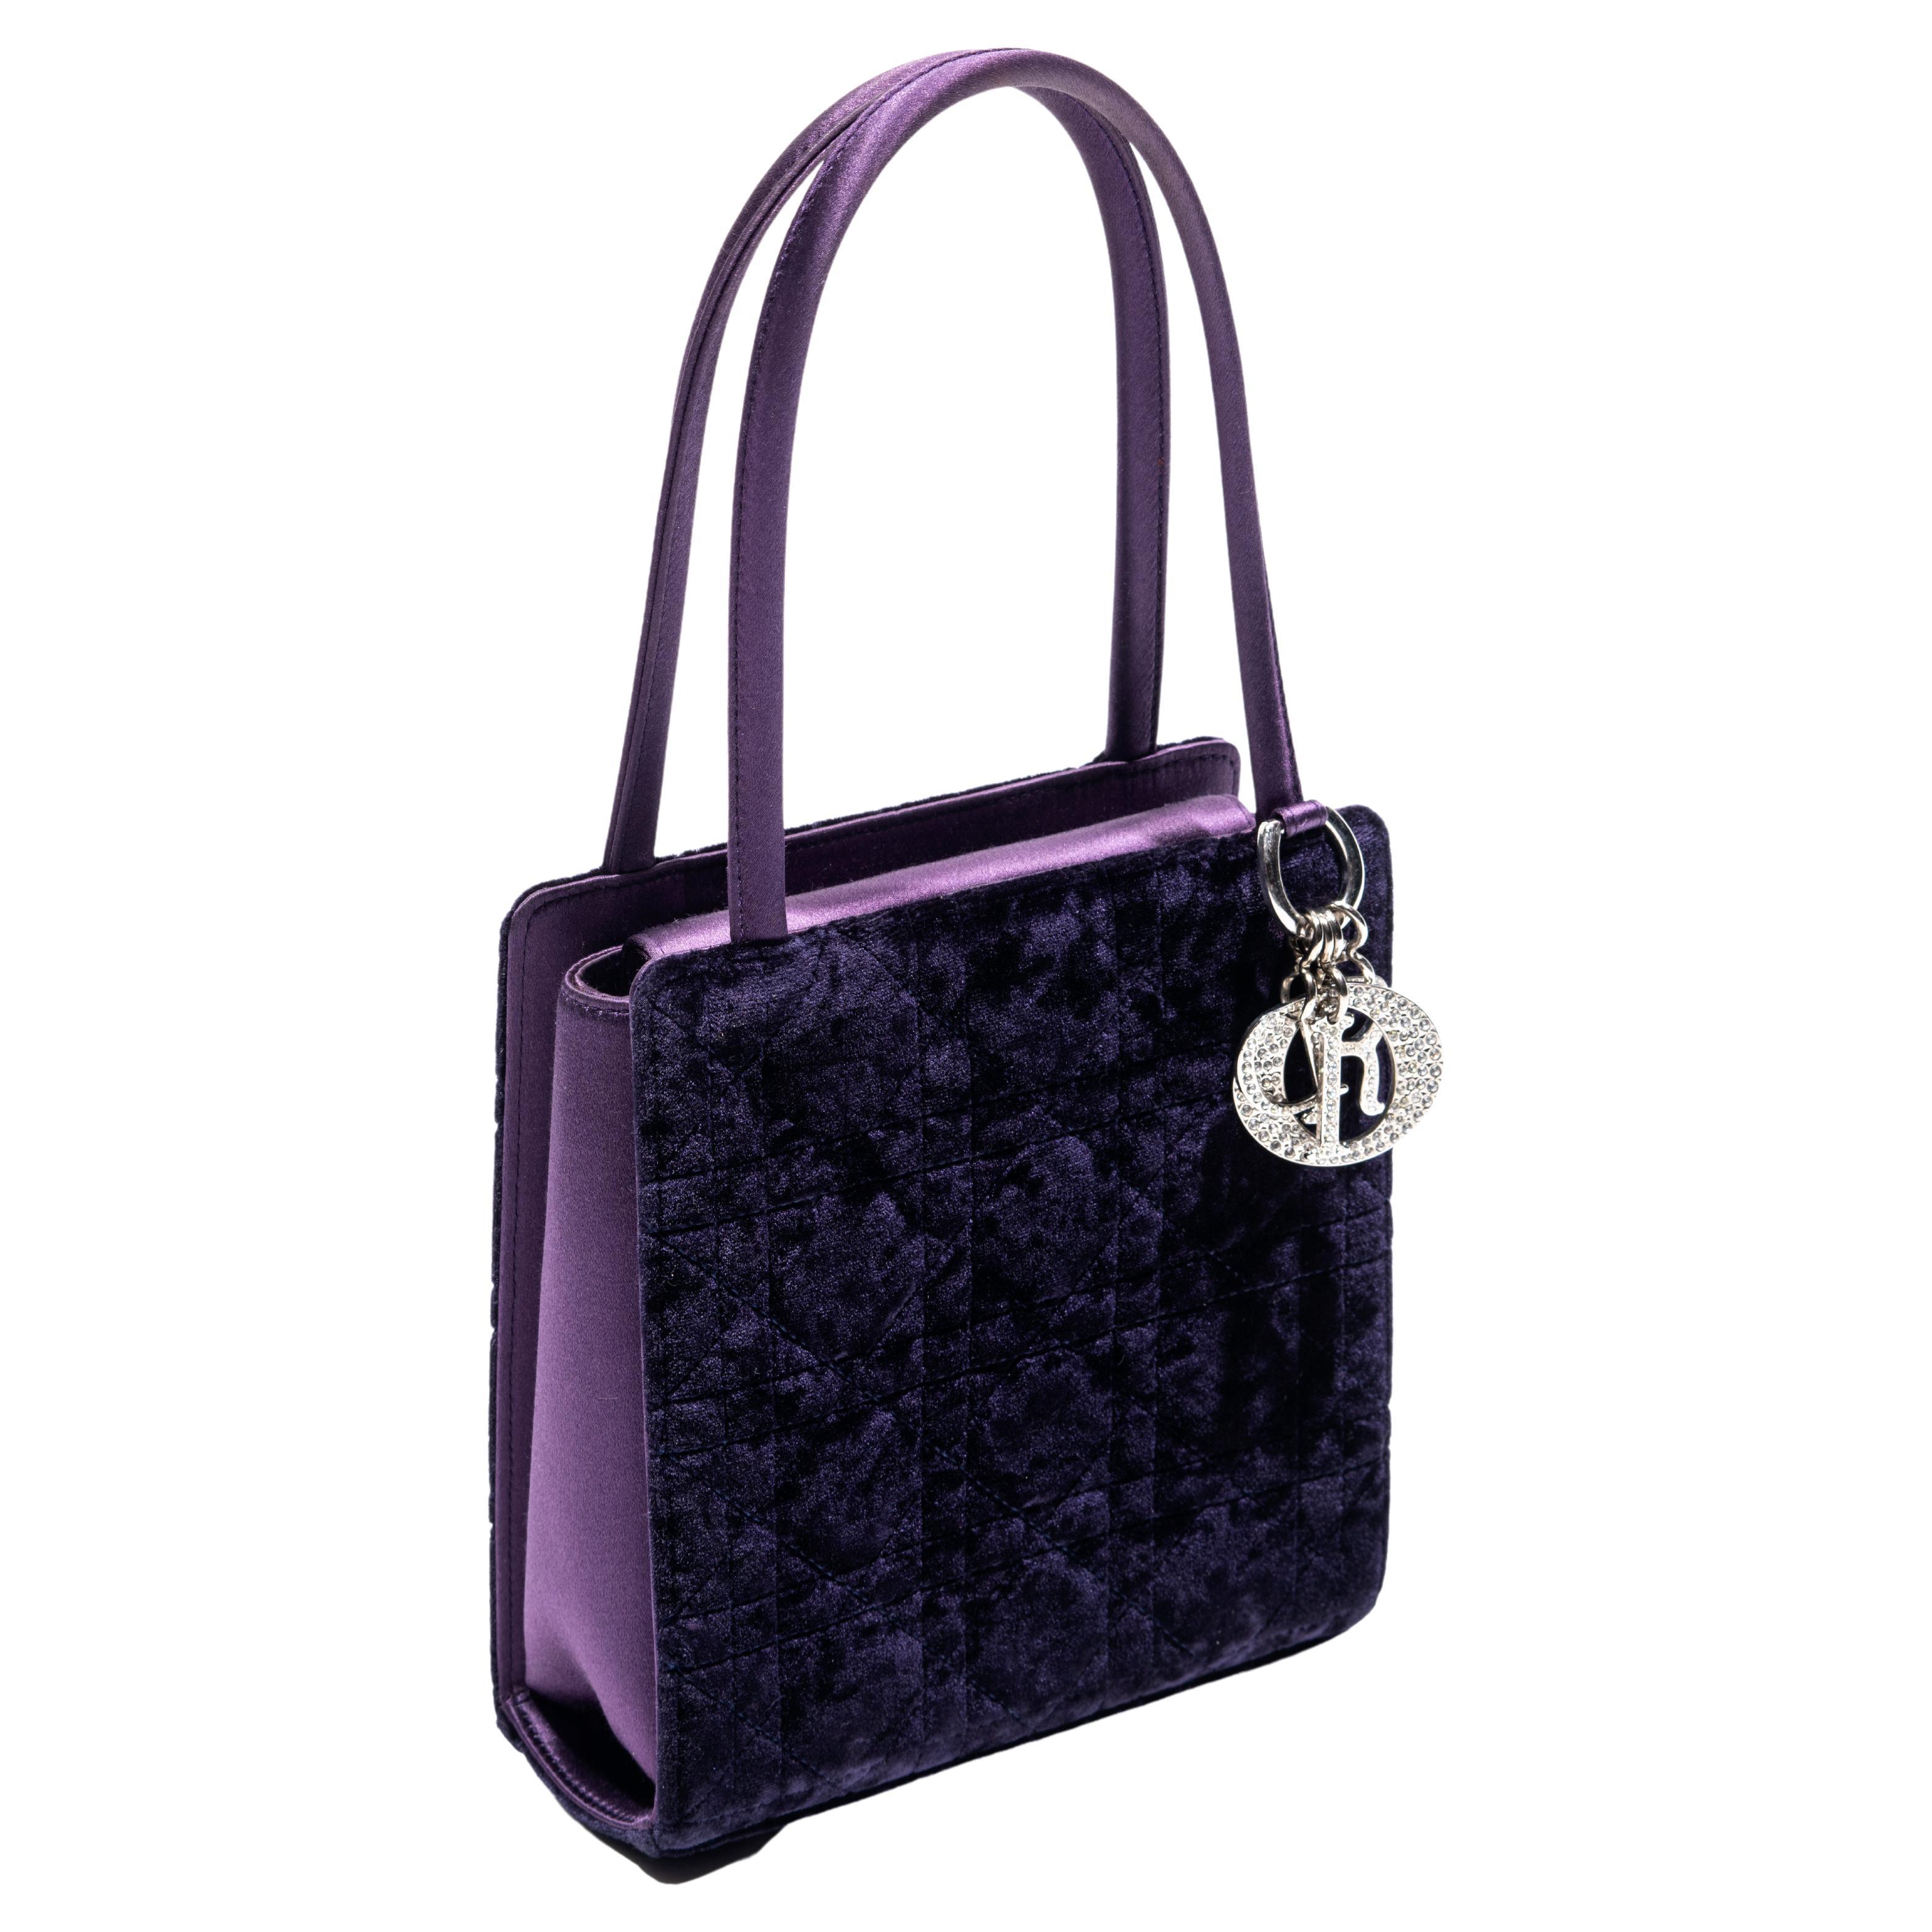 Christian Dior by John Galliano purple velvet and crystal mini bag, c. 1998 For Sale